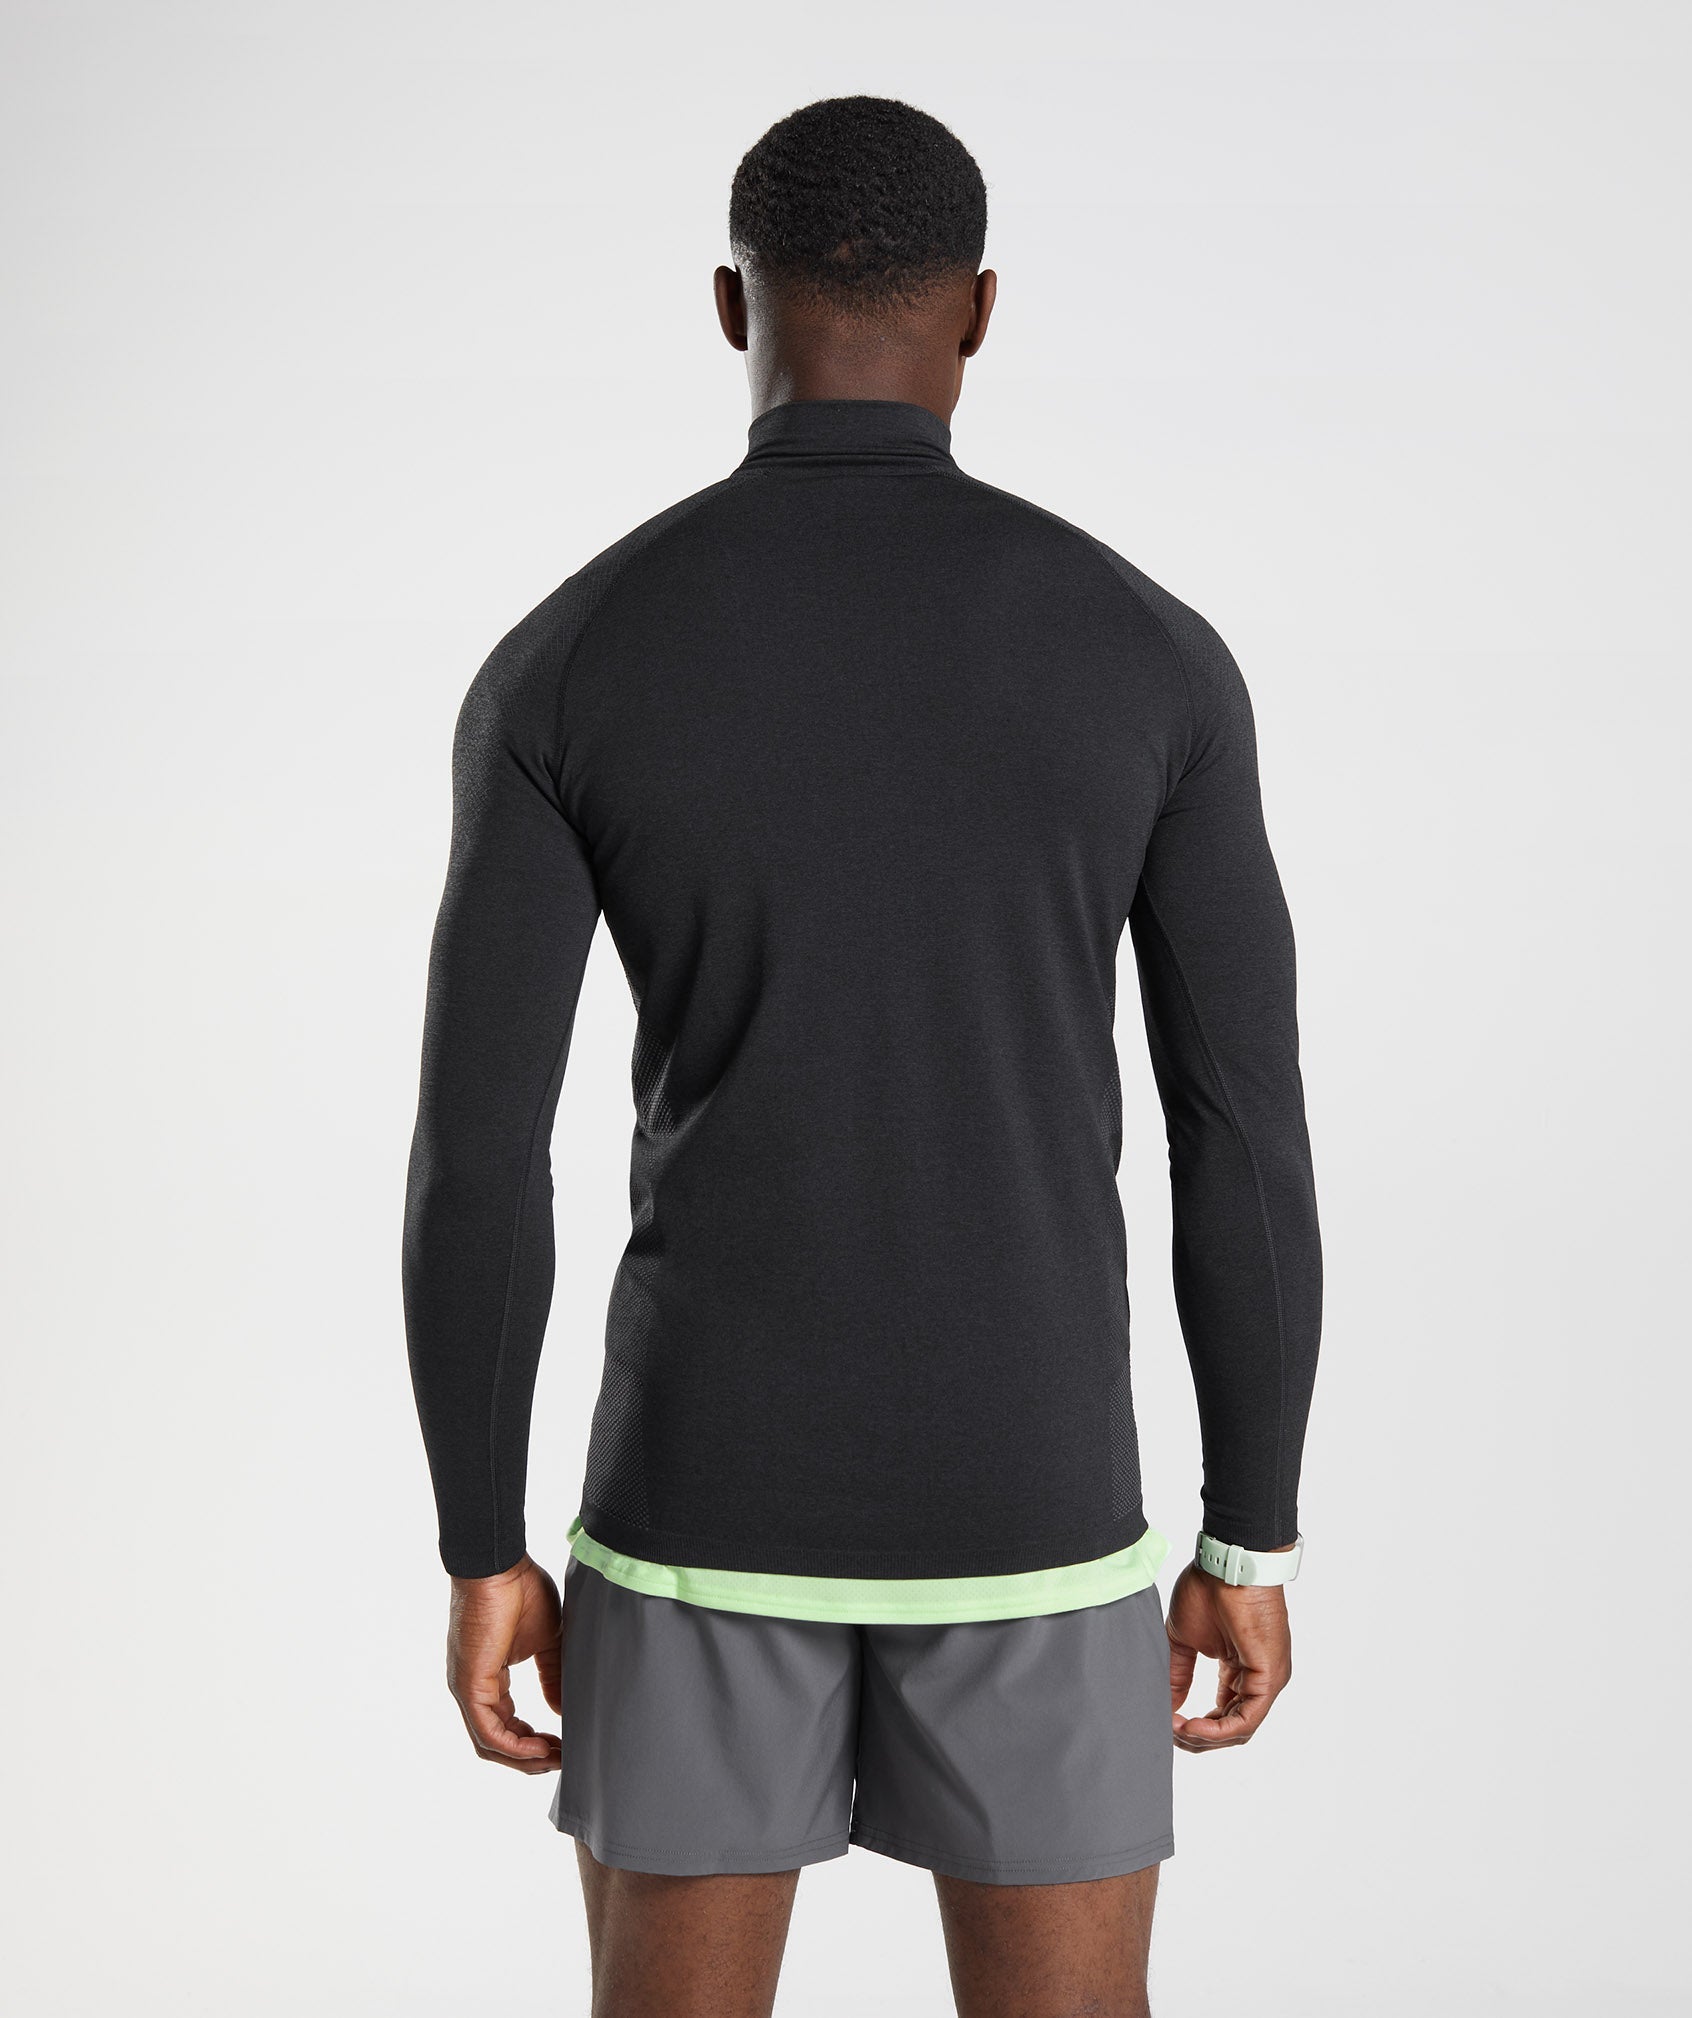 RUNNING/TRAIL CLOTHING & EQUIPMENT Skins A400 - Cycling Shorts - Men's -  black - Private Sport Shop